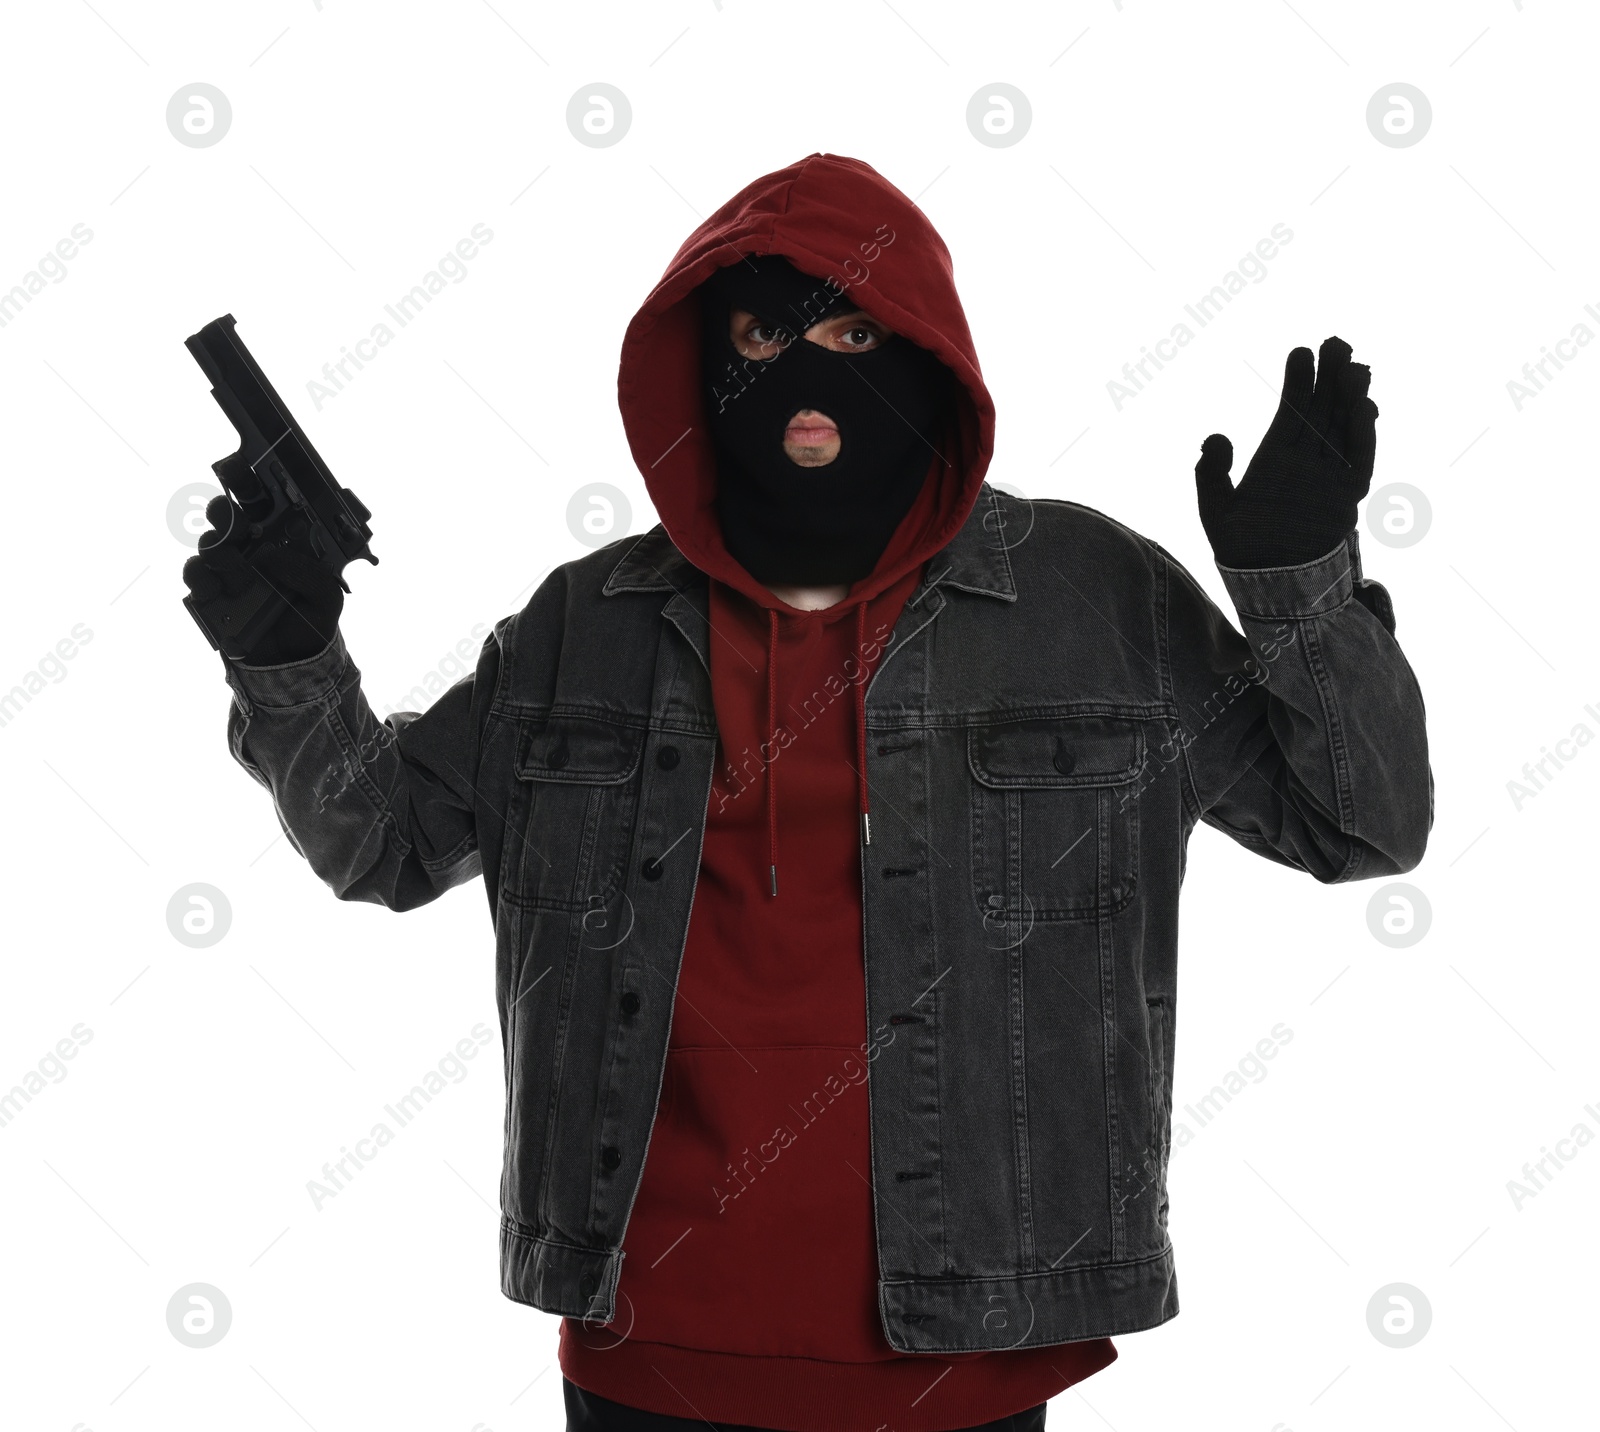 Photo of Thief in balaclava raising hands with gun on white background